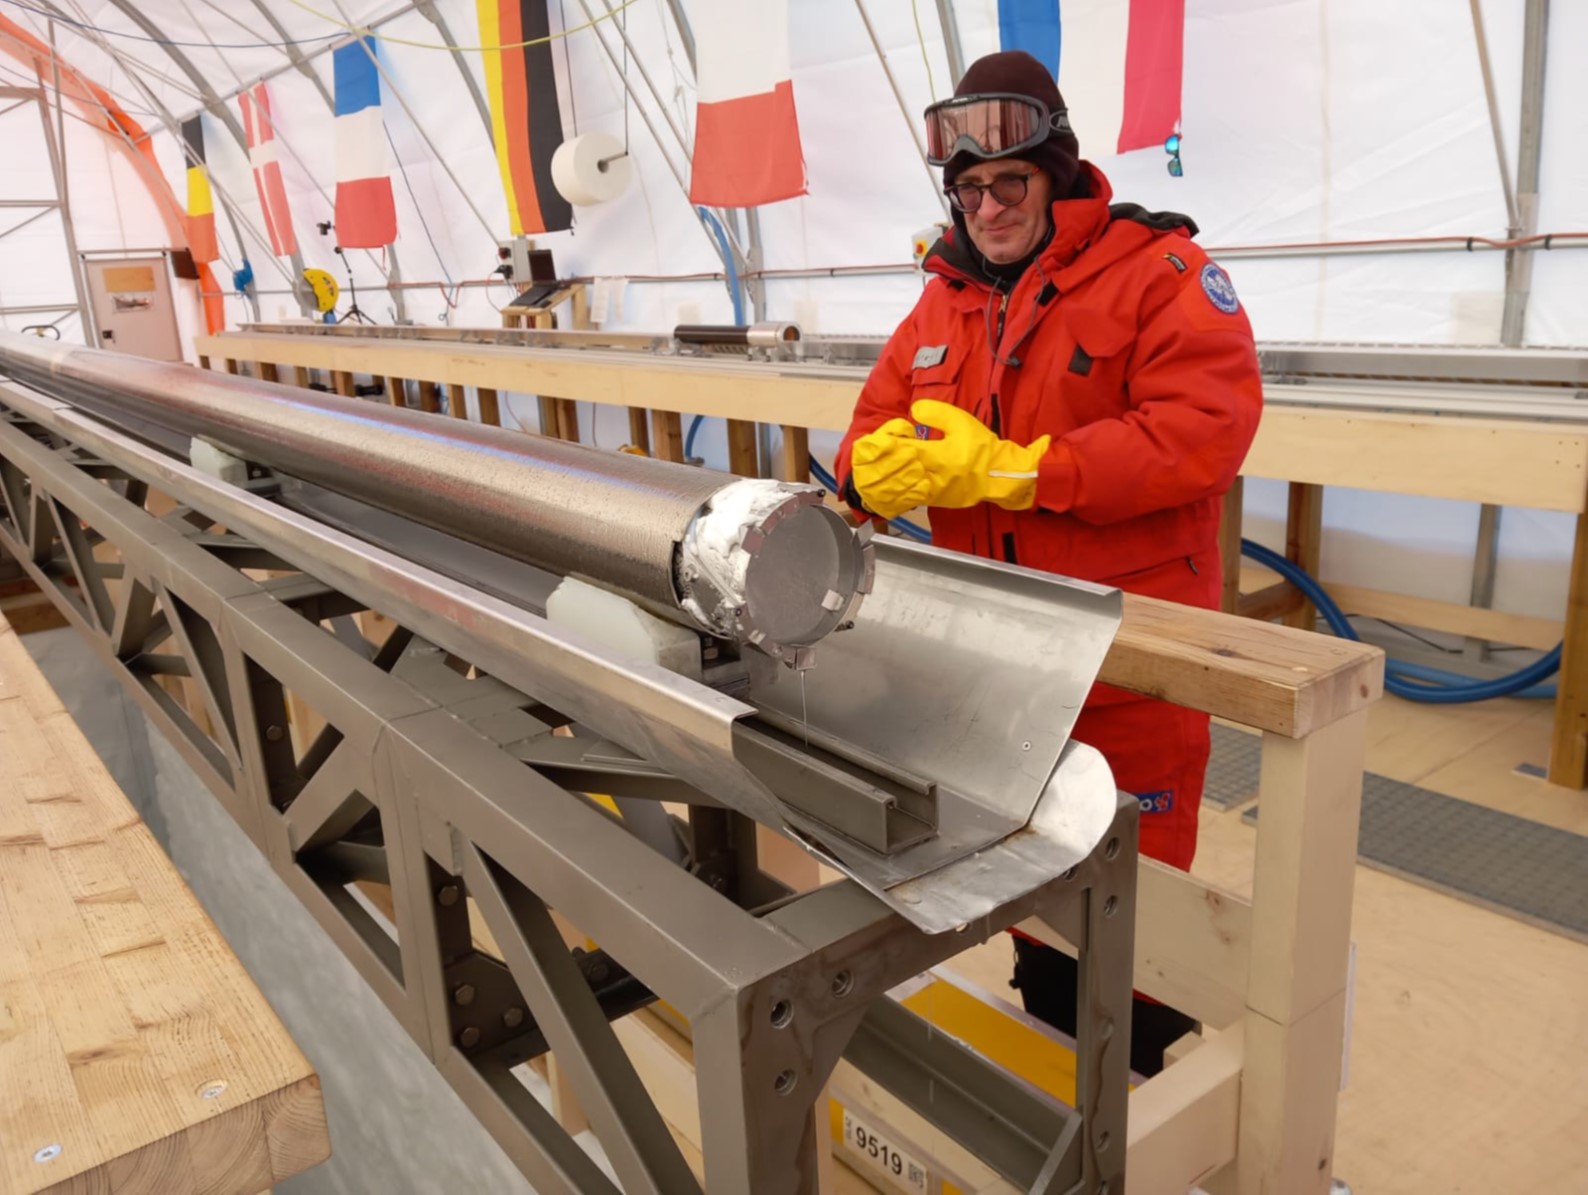 Saverio, proudly looking at the first ice core drilled this year